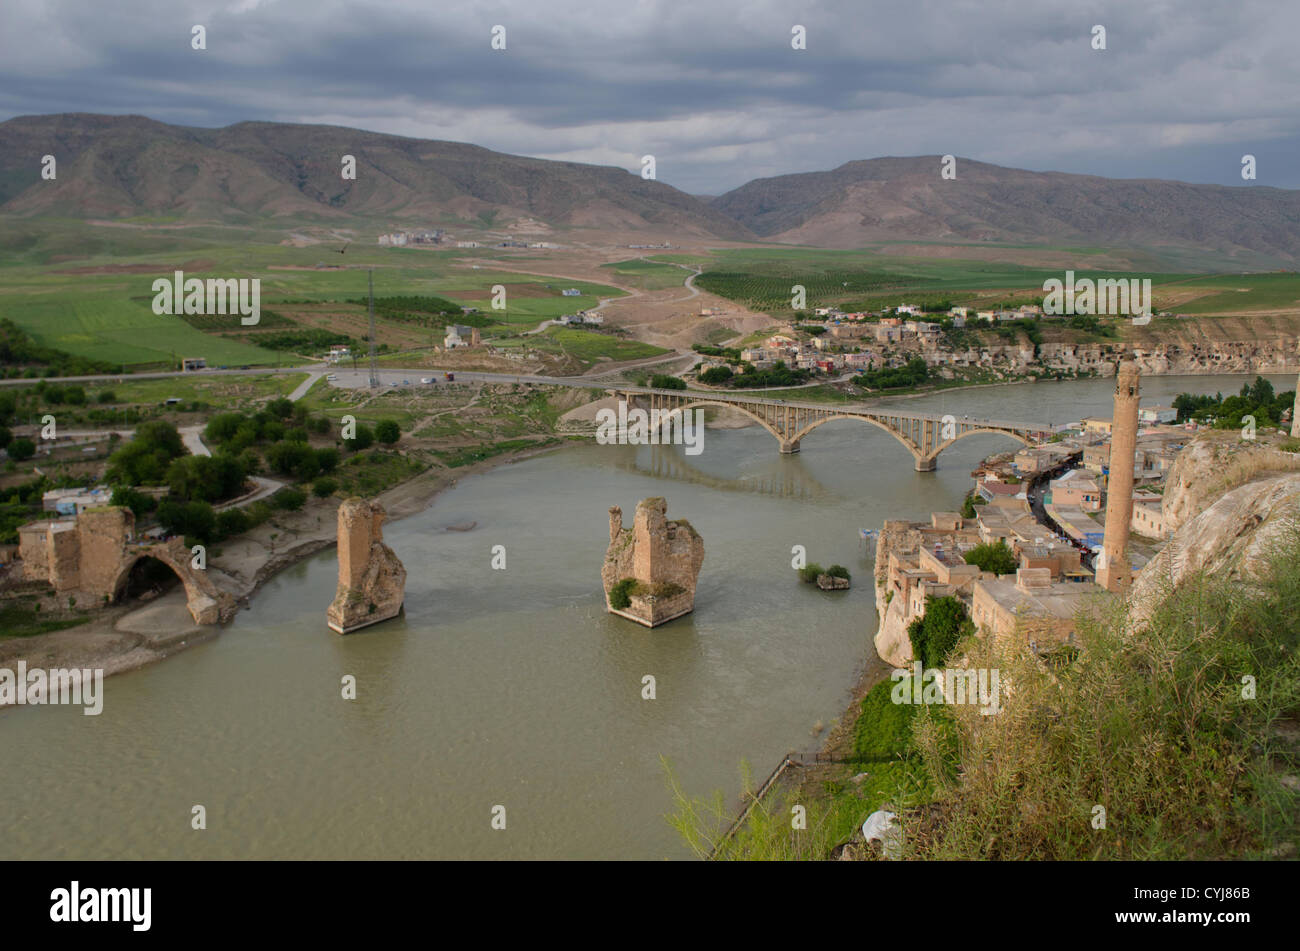 May 06, 2012 - Hasankeyf, Batman, Turkey - Sitting on the banks of the Tigris river the ancient town of Hasankeyf lives in a kind of limbo, thousands of years of history about to disappear beneath the flood waters of the ILISU damn project, for the people of Hasankeyf unable to build or sell homes, find work or even get a straight answer to when the past will be washed away, this threat has hung over the town for decades but now the Turkish government is trying to push ahead with the dam despite international condemnation. (Credit Image: © John Wreford/ZUMAPRESS.com) Stock Photo